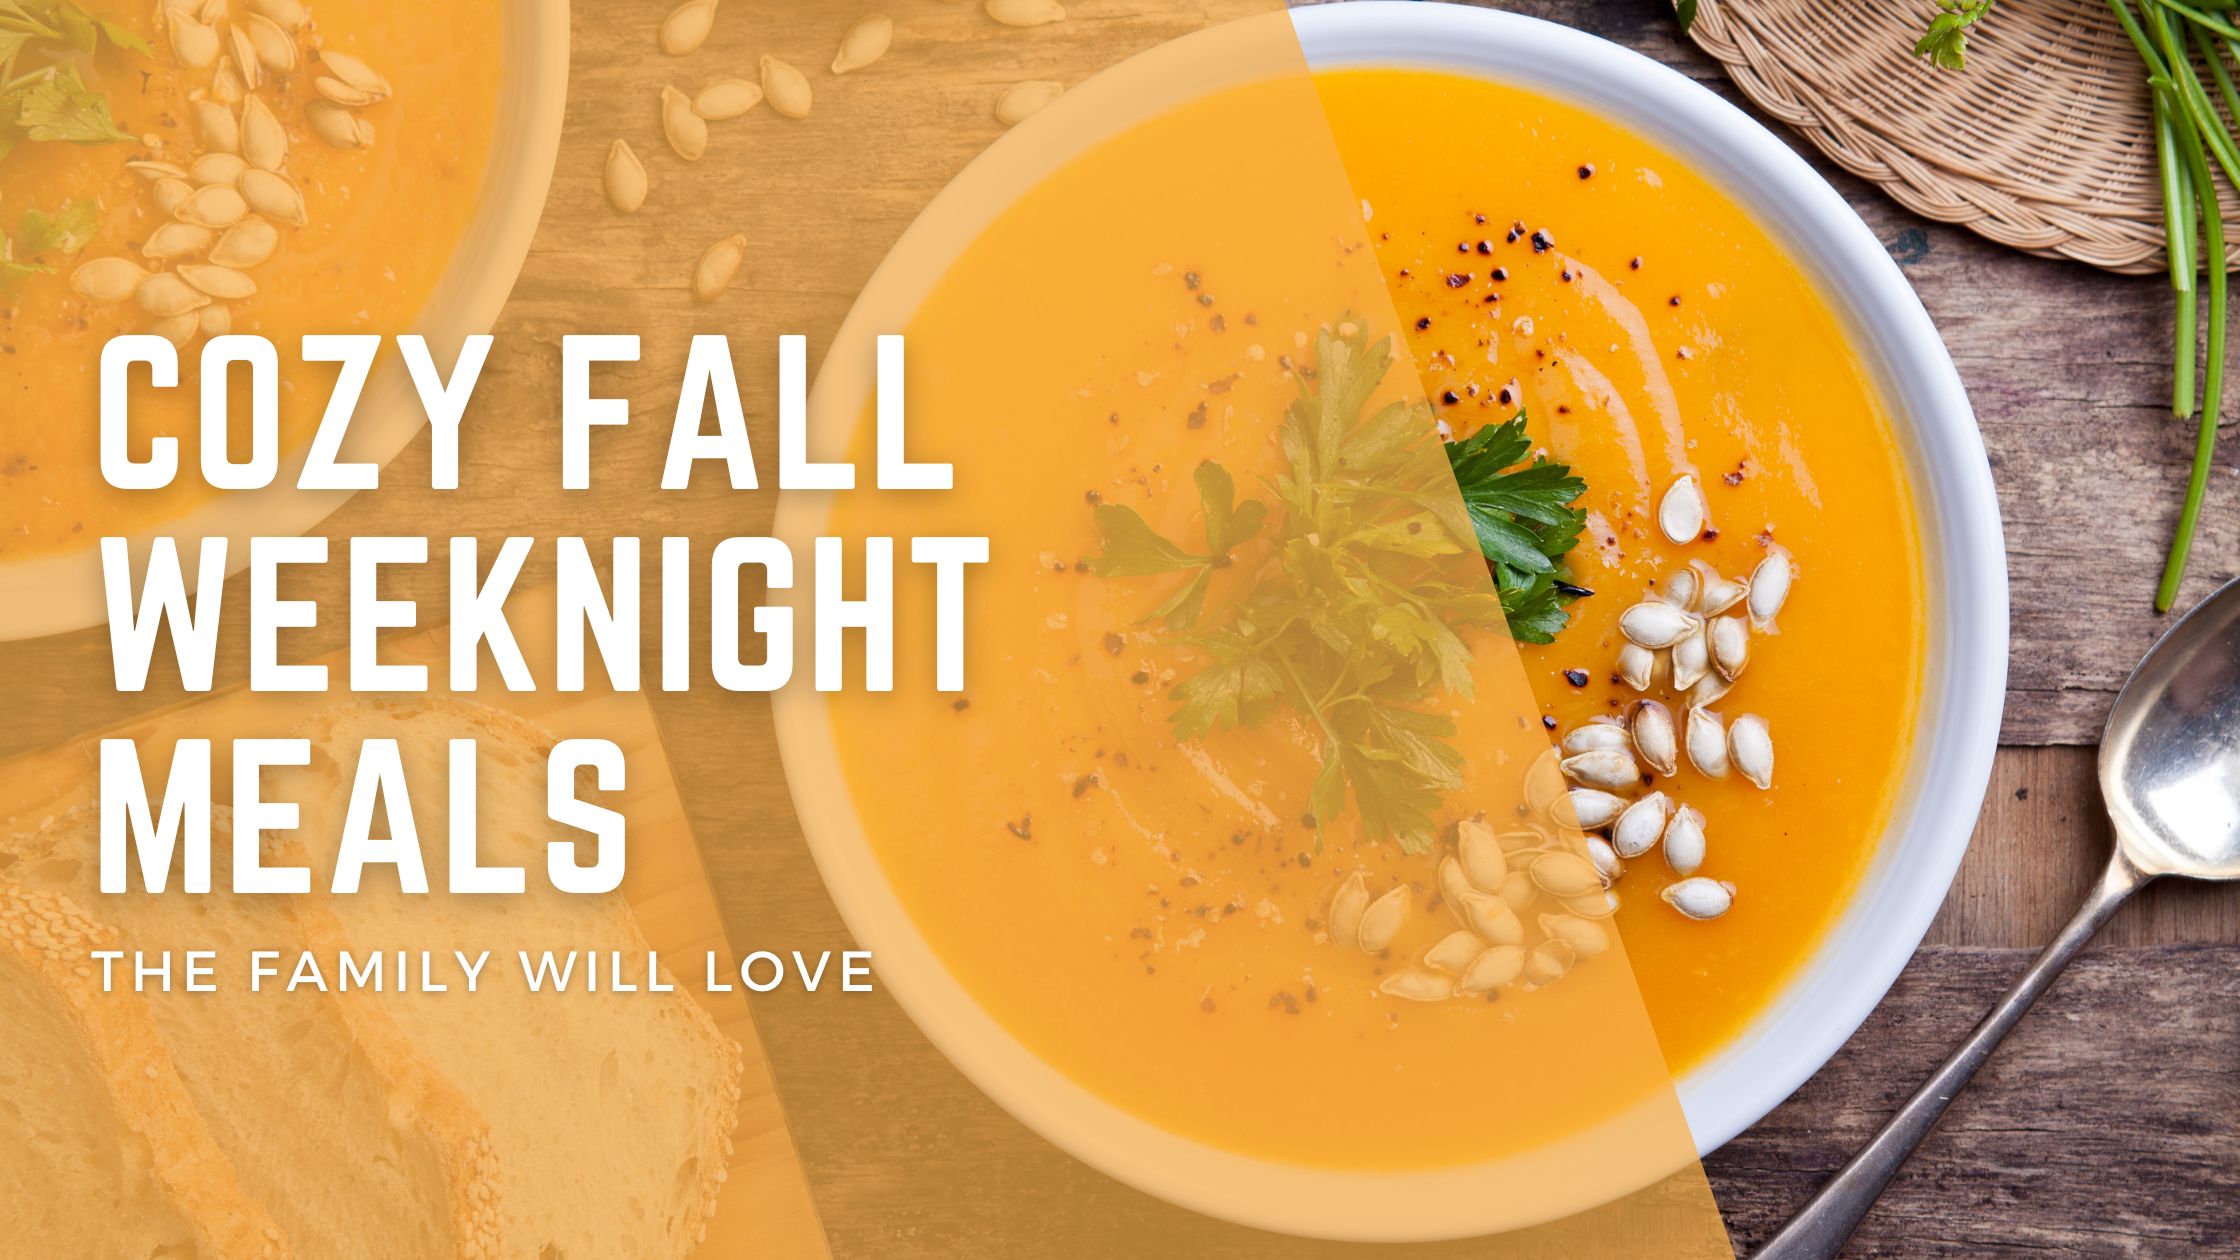 Cozy Fall Weeknight Meals the Family Will Love